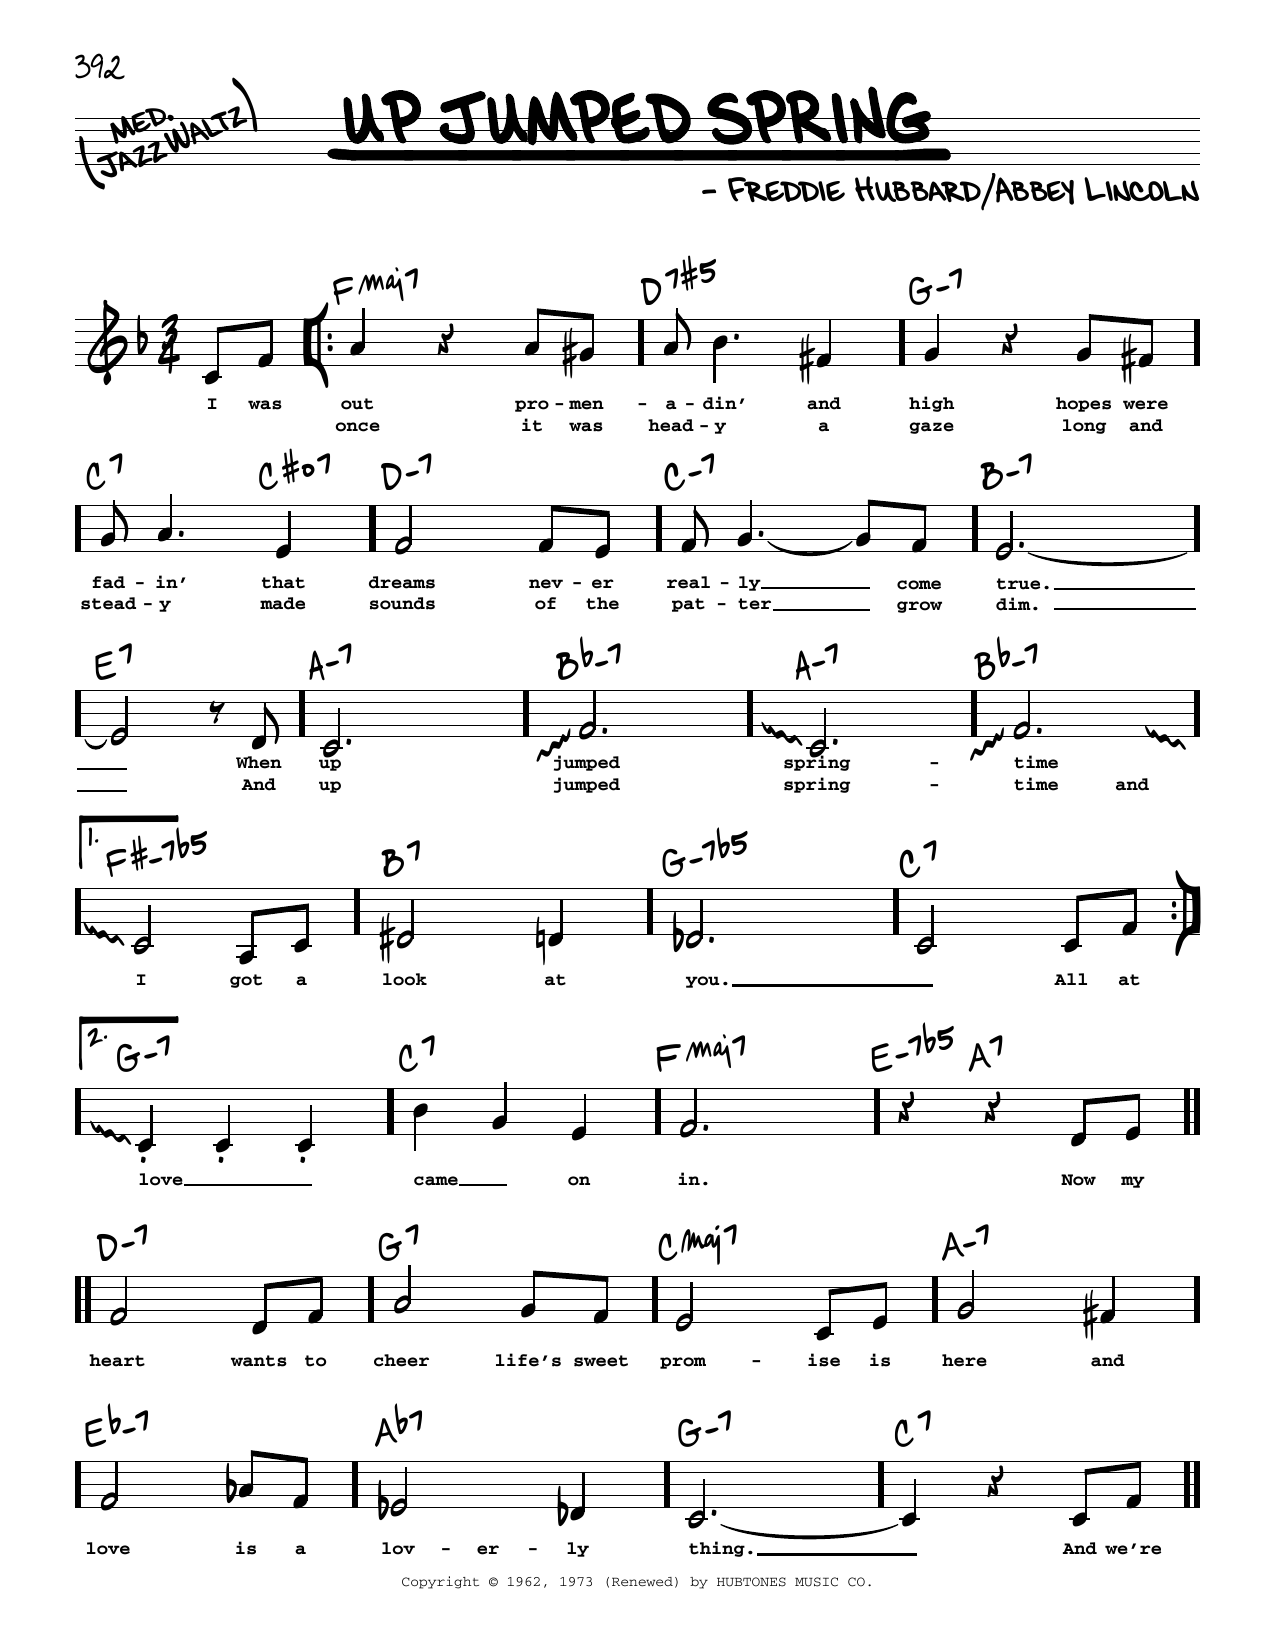 Download Freddie Hubbard Up Jumped Spring (Low Voice) Sheet Music